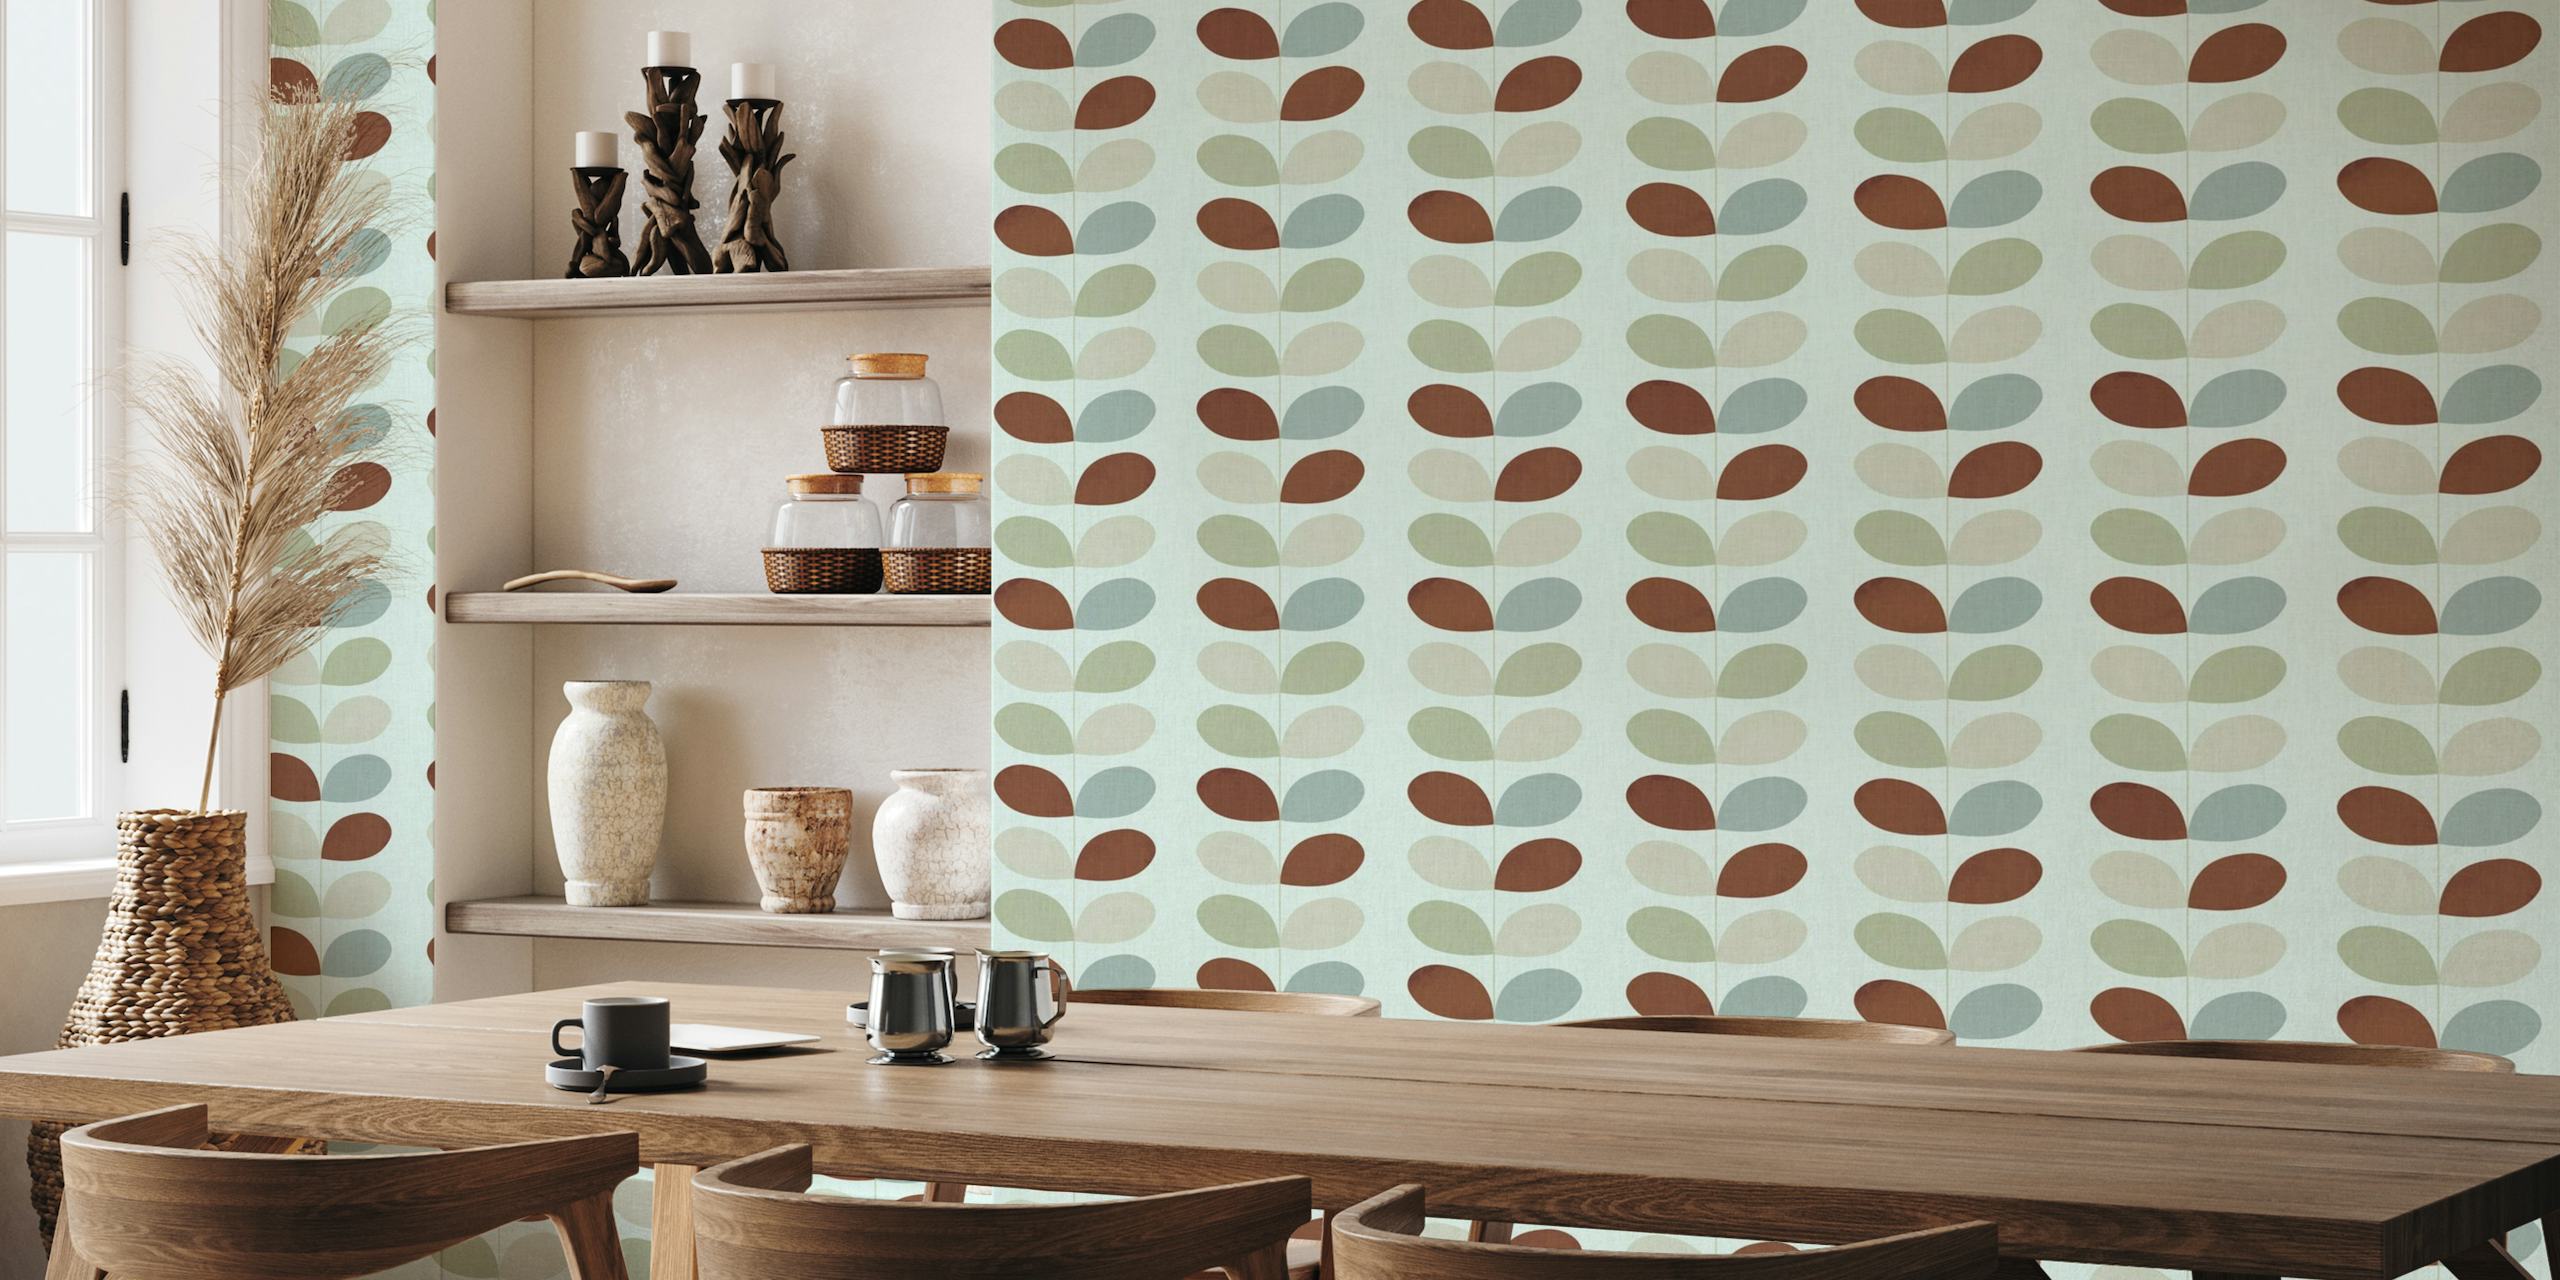 Mid Century Leaves Mint Chocolate wall mural with stylized leaves in mint, chocolate, and grey hues against a cream background.